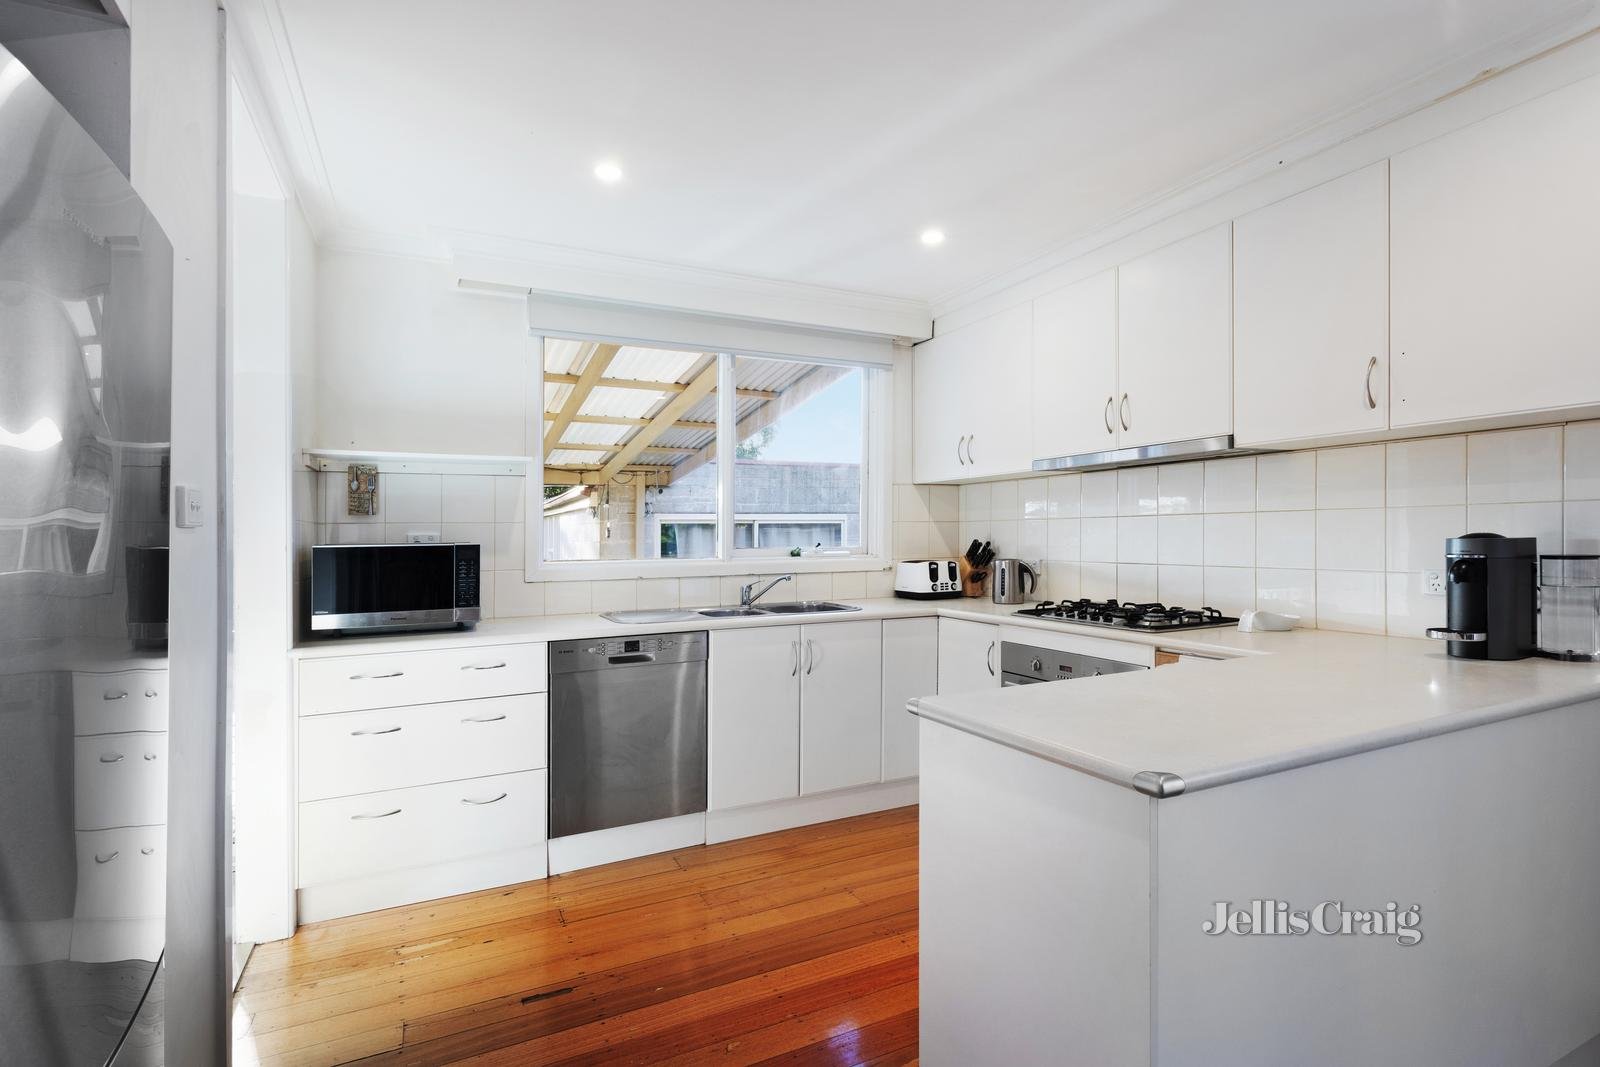 27 Westerfield Drive, Notting Hill image 3